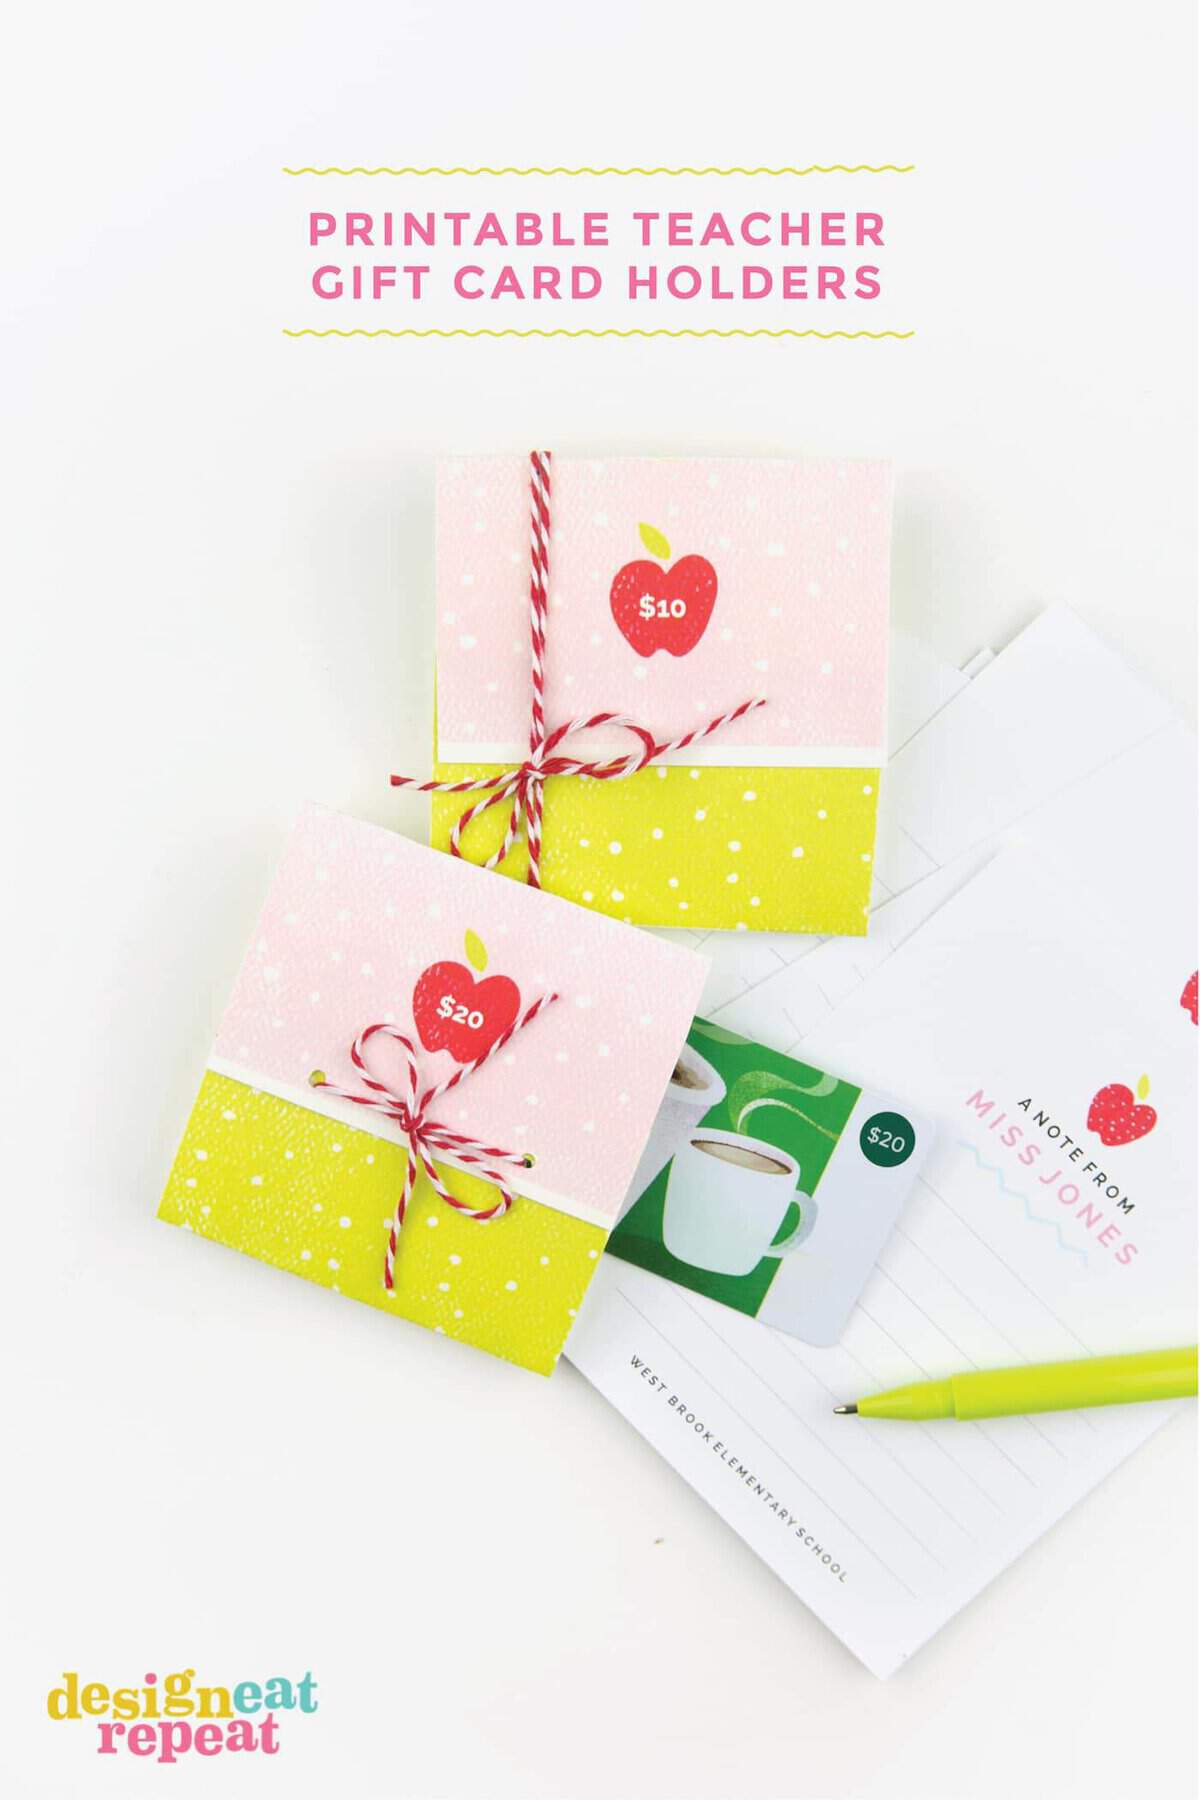 Instead of gifting generic body soaps or apple-themed home decor this year, give your teachers something they really want: money! These printable gift card holders can be personalized with the dollar amount and have lots of space inside to write a personal note! #avery #printables #teachergiftidea